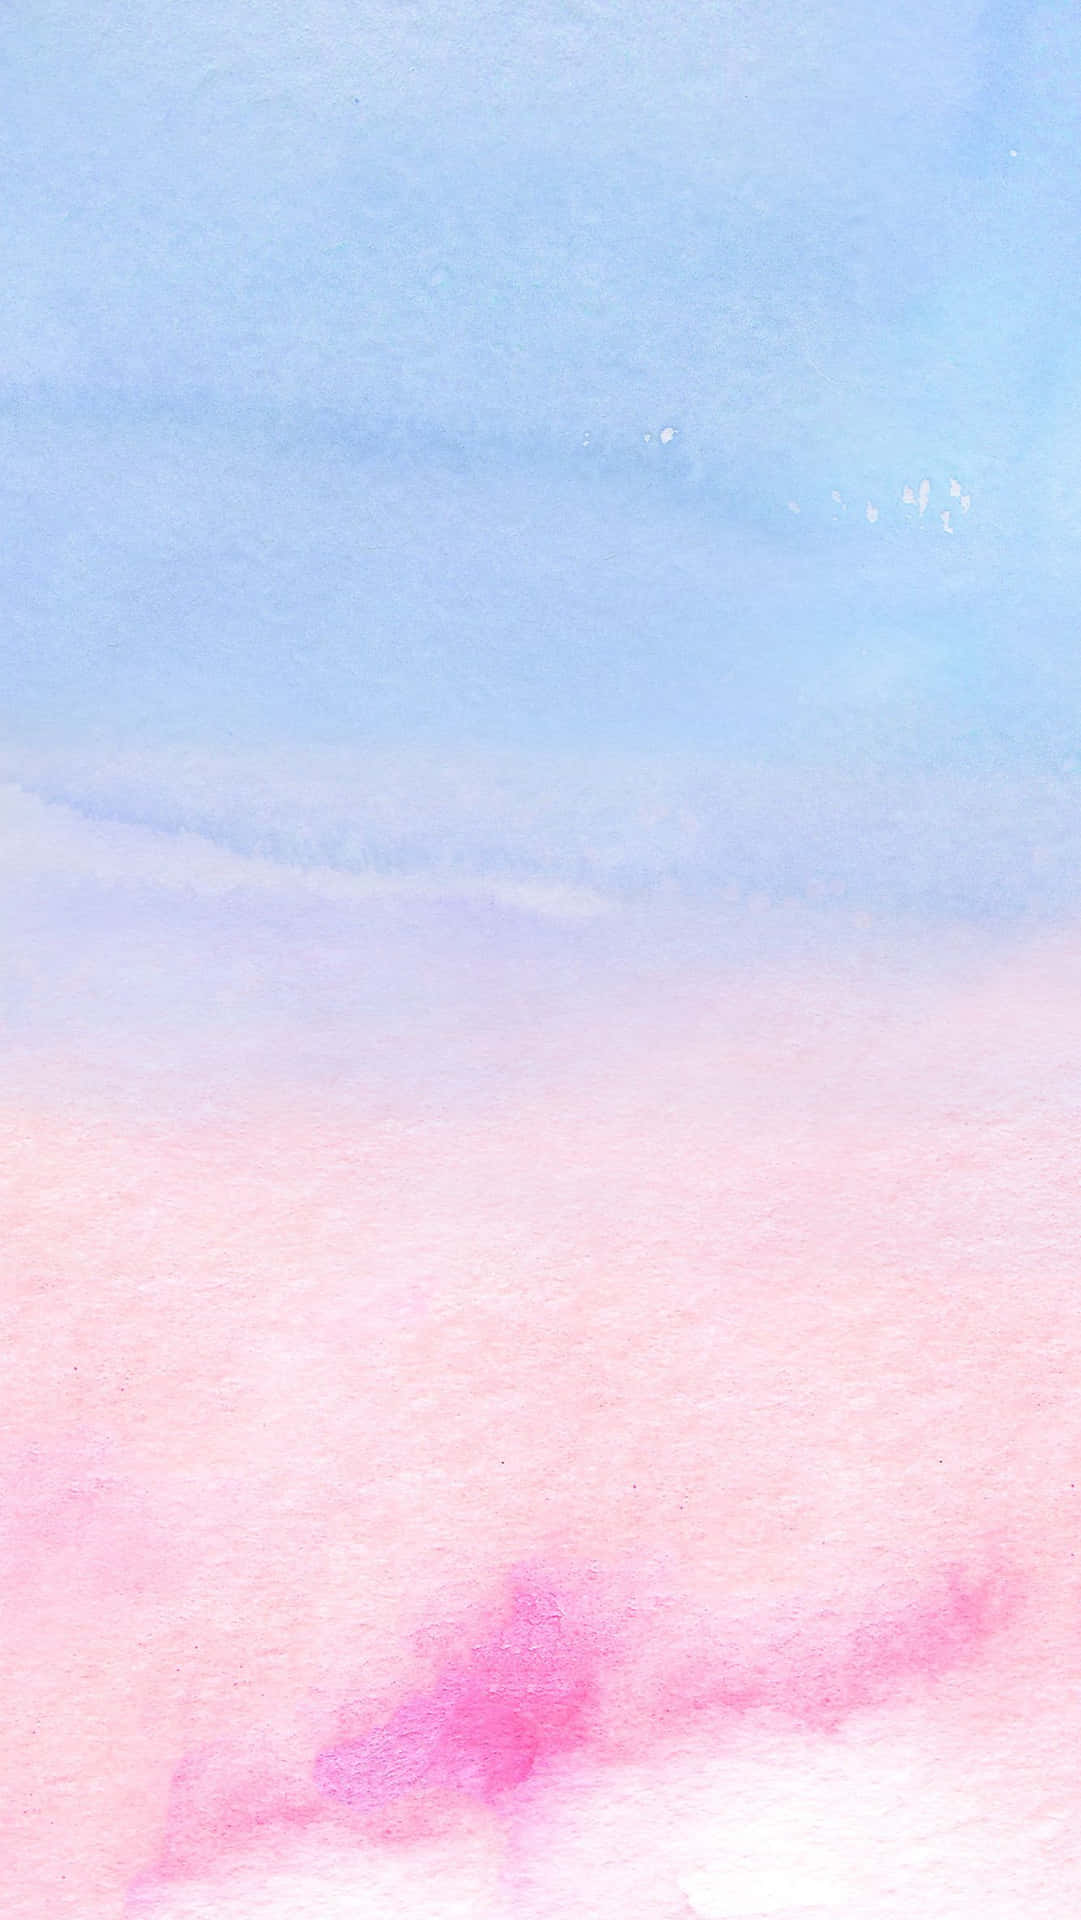 A dreamy and vibrant pastel-colored background. Wallpaper